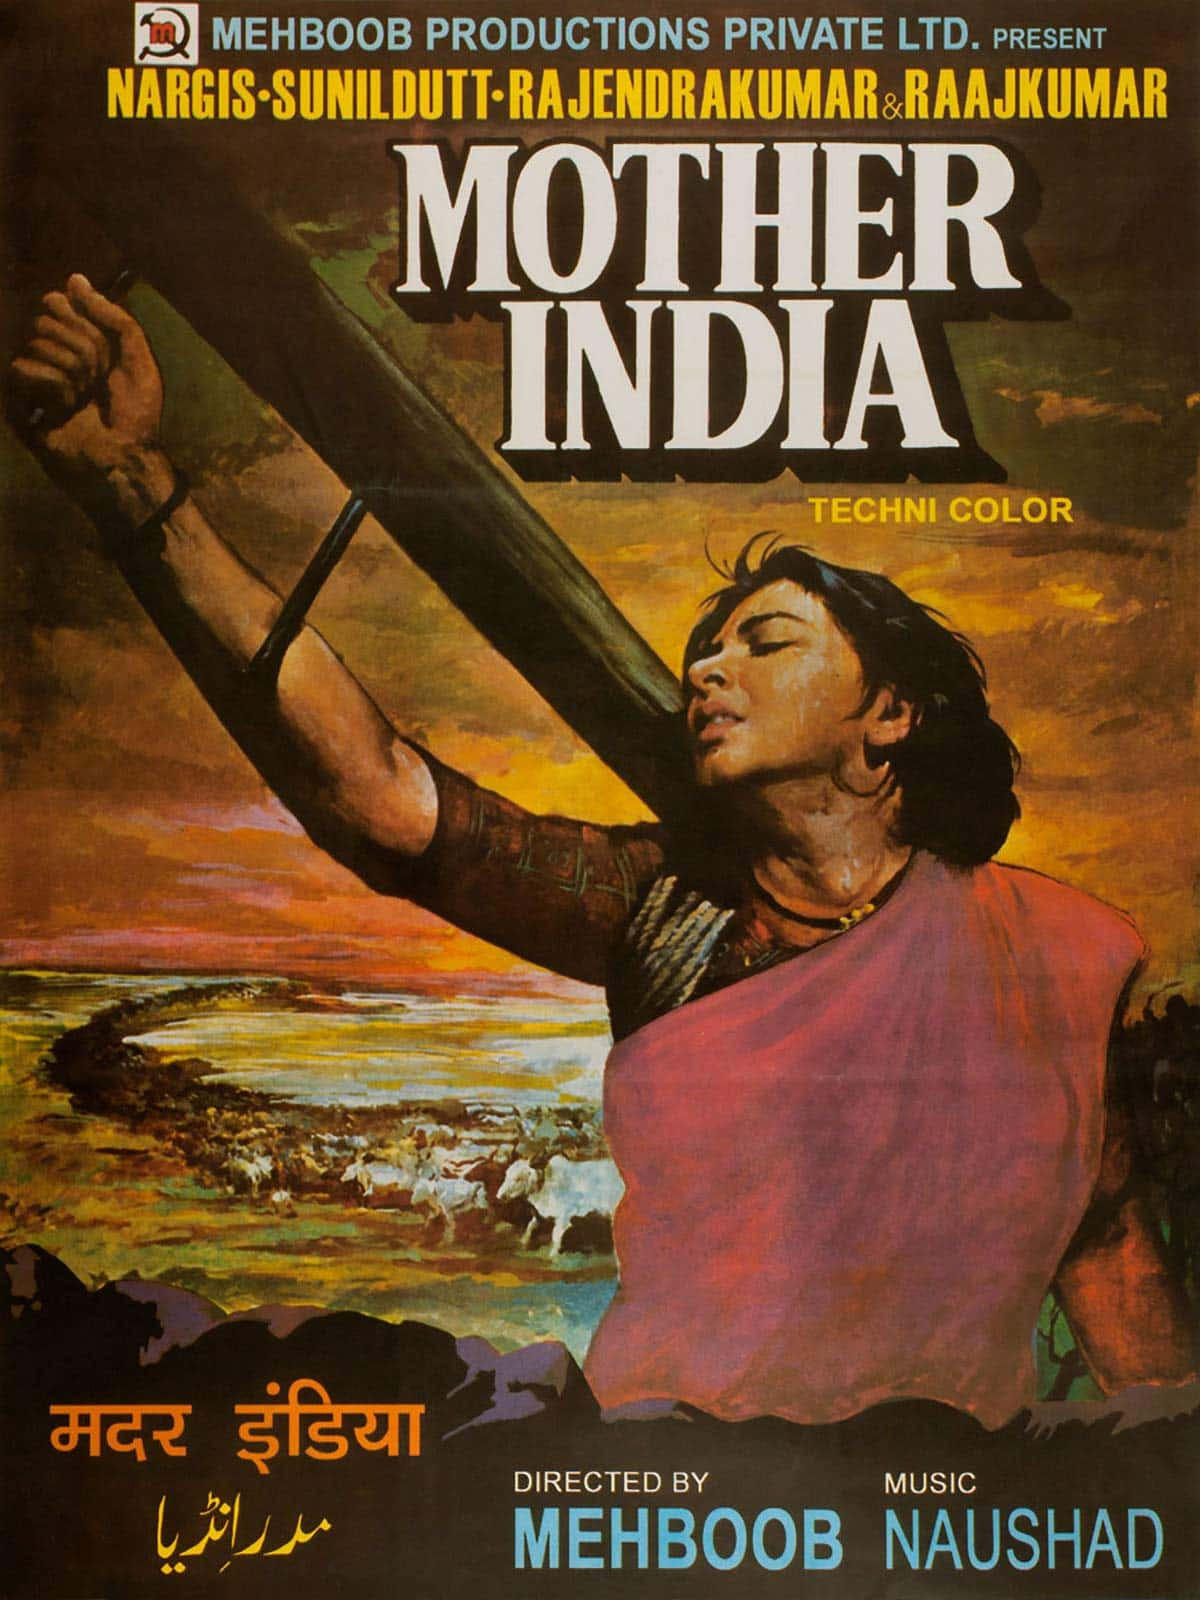 Must Watch Bollywood Movie: Mother India